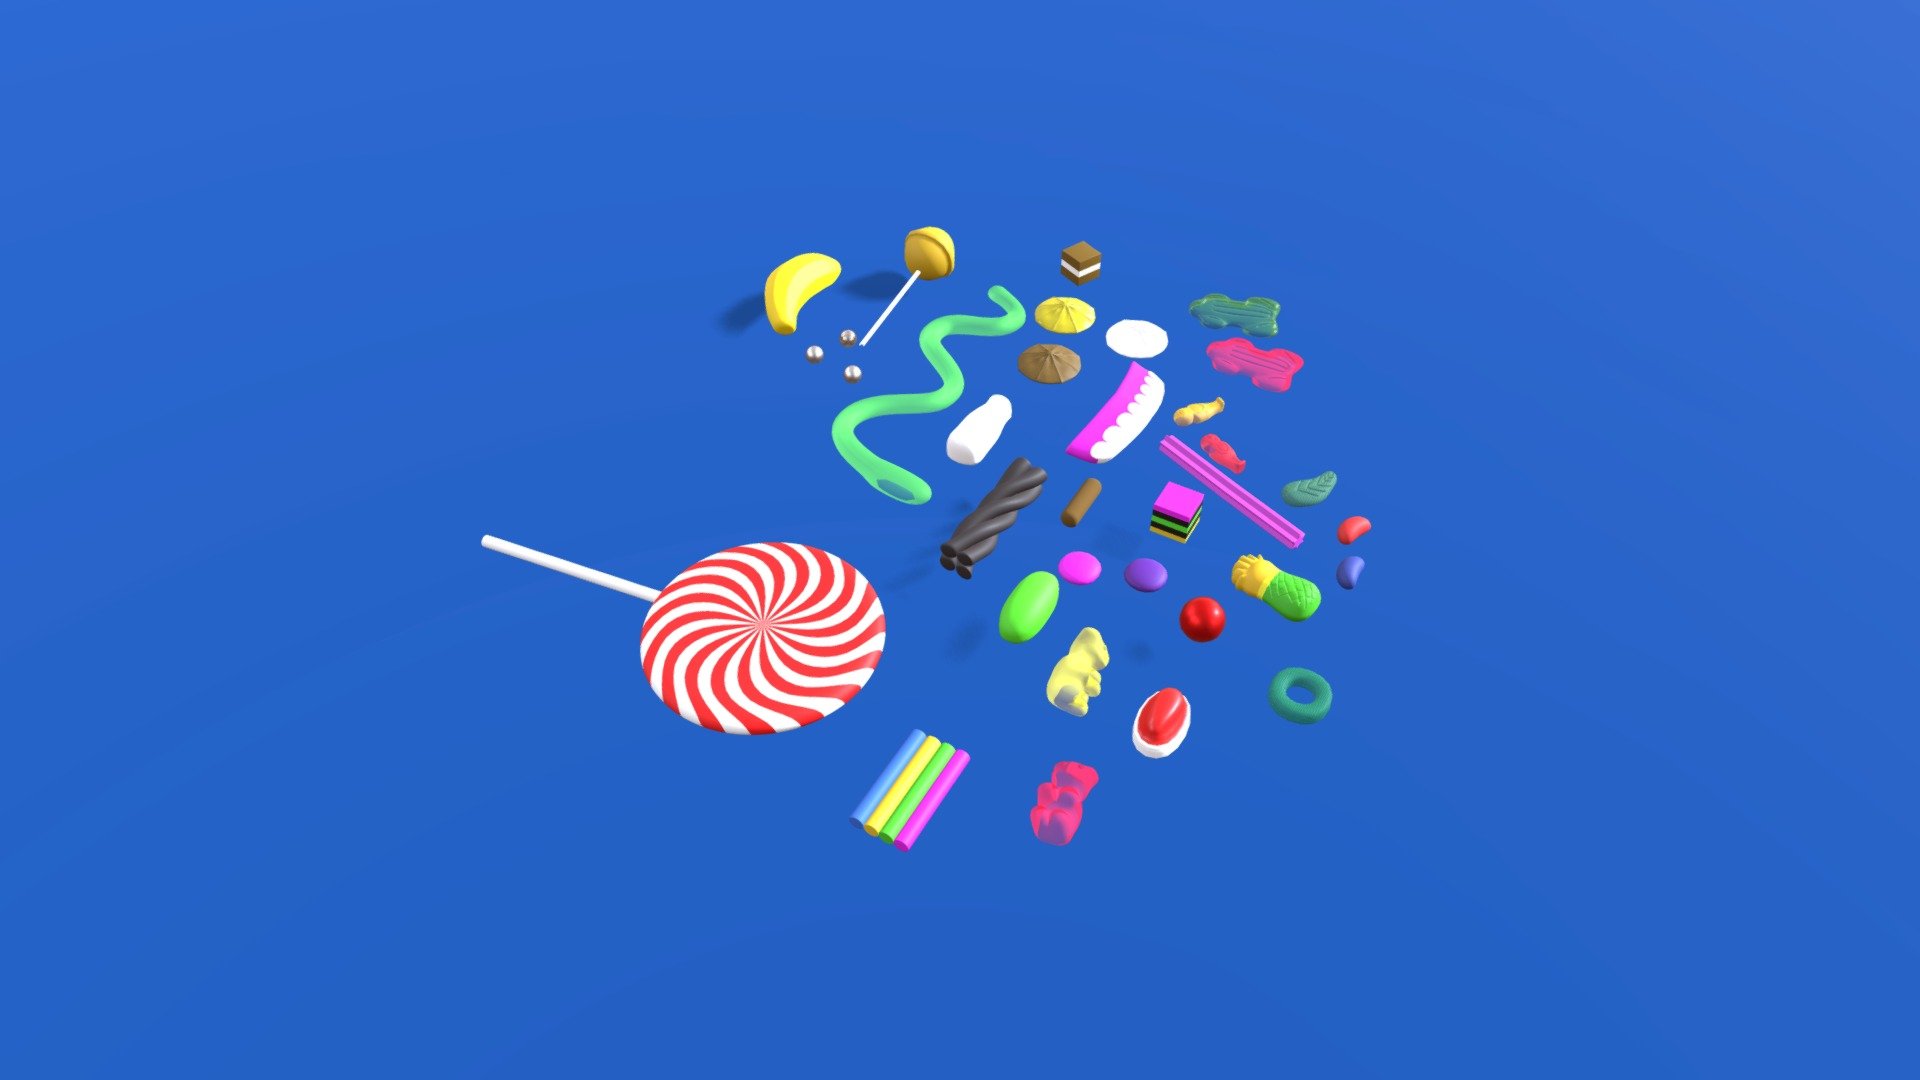 I have a collection of lollies, included are ,teeth, lollipop,gummy_bear, jelly_baby, pineapple,musk_stick, choc_bud, freckle, mint_leaf, frogs, snake, chuppa_chup, milk bottle, licorice, banana, musk_stick, bullet,

Model comes without colors and textures 3d model